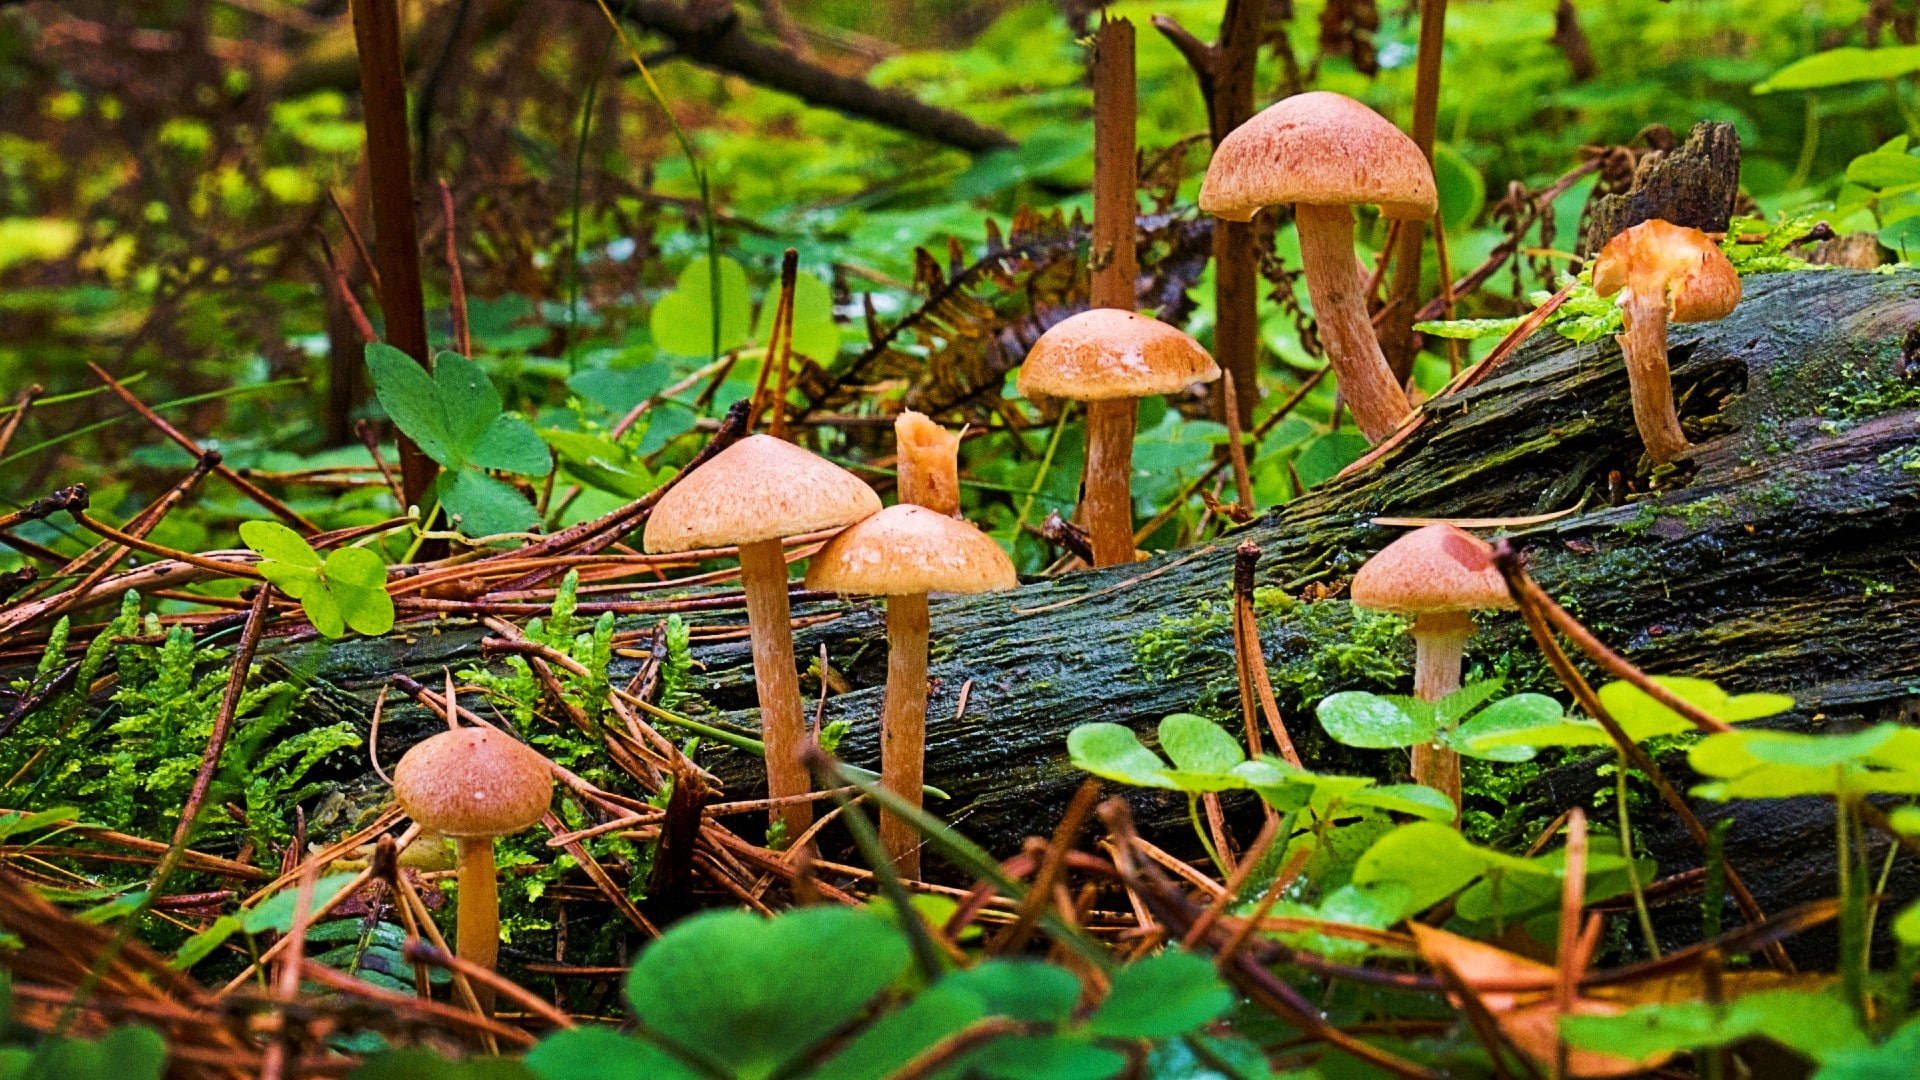 fungi in the forest